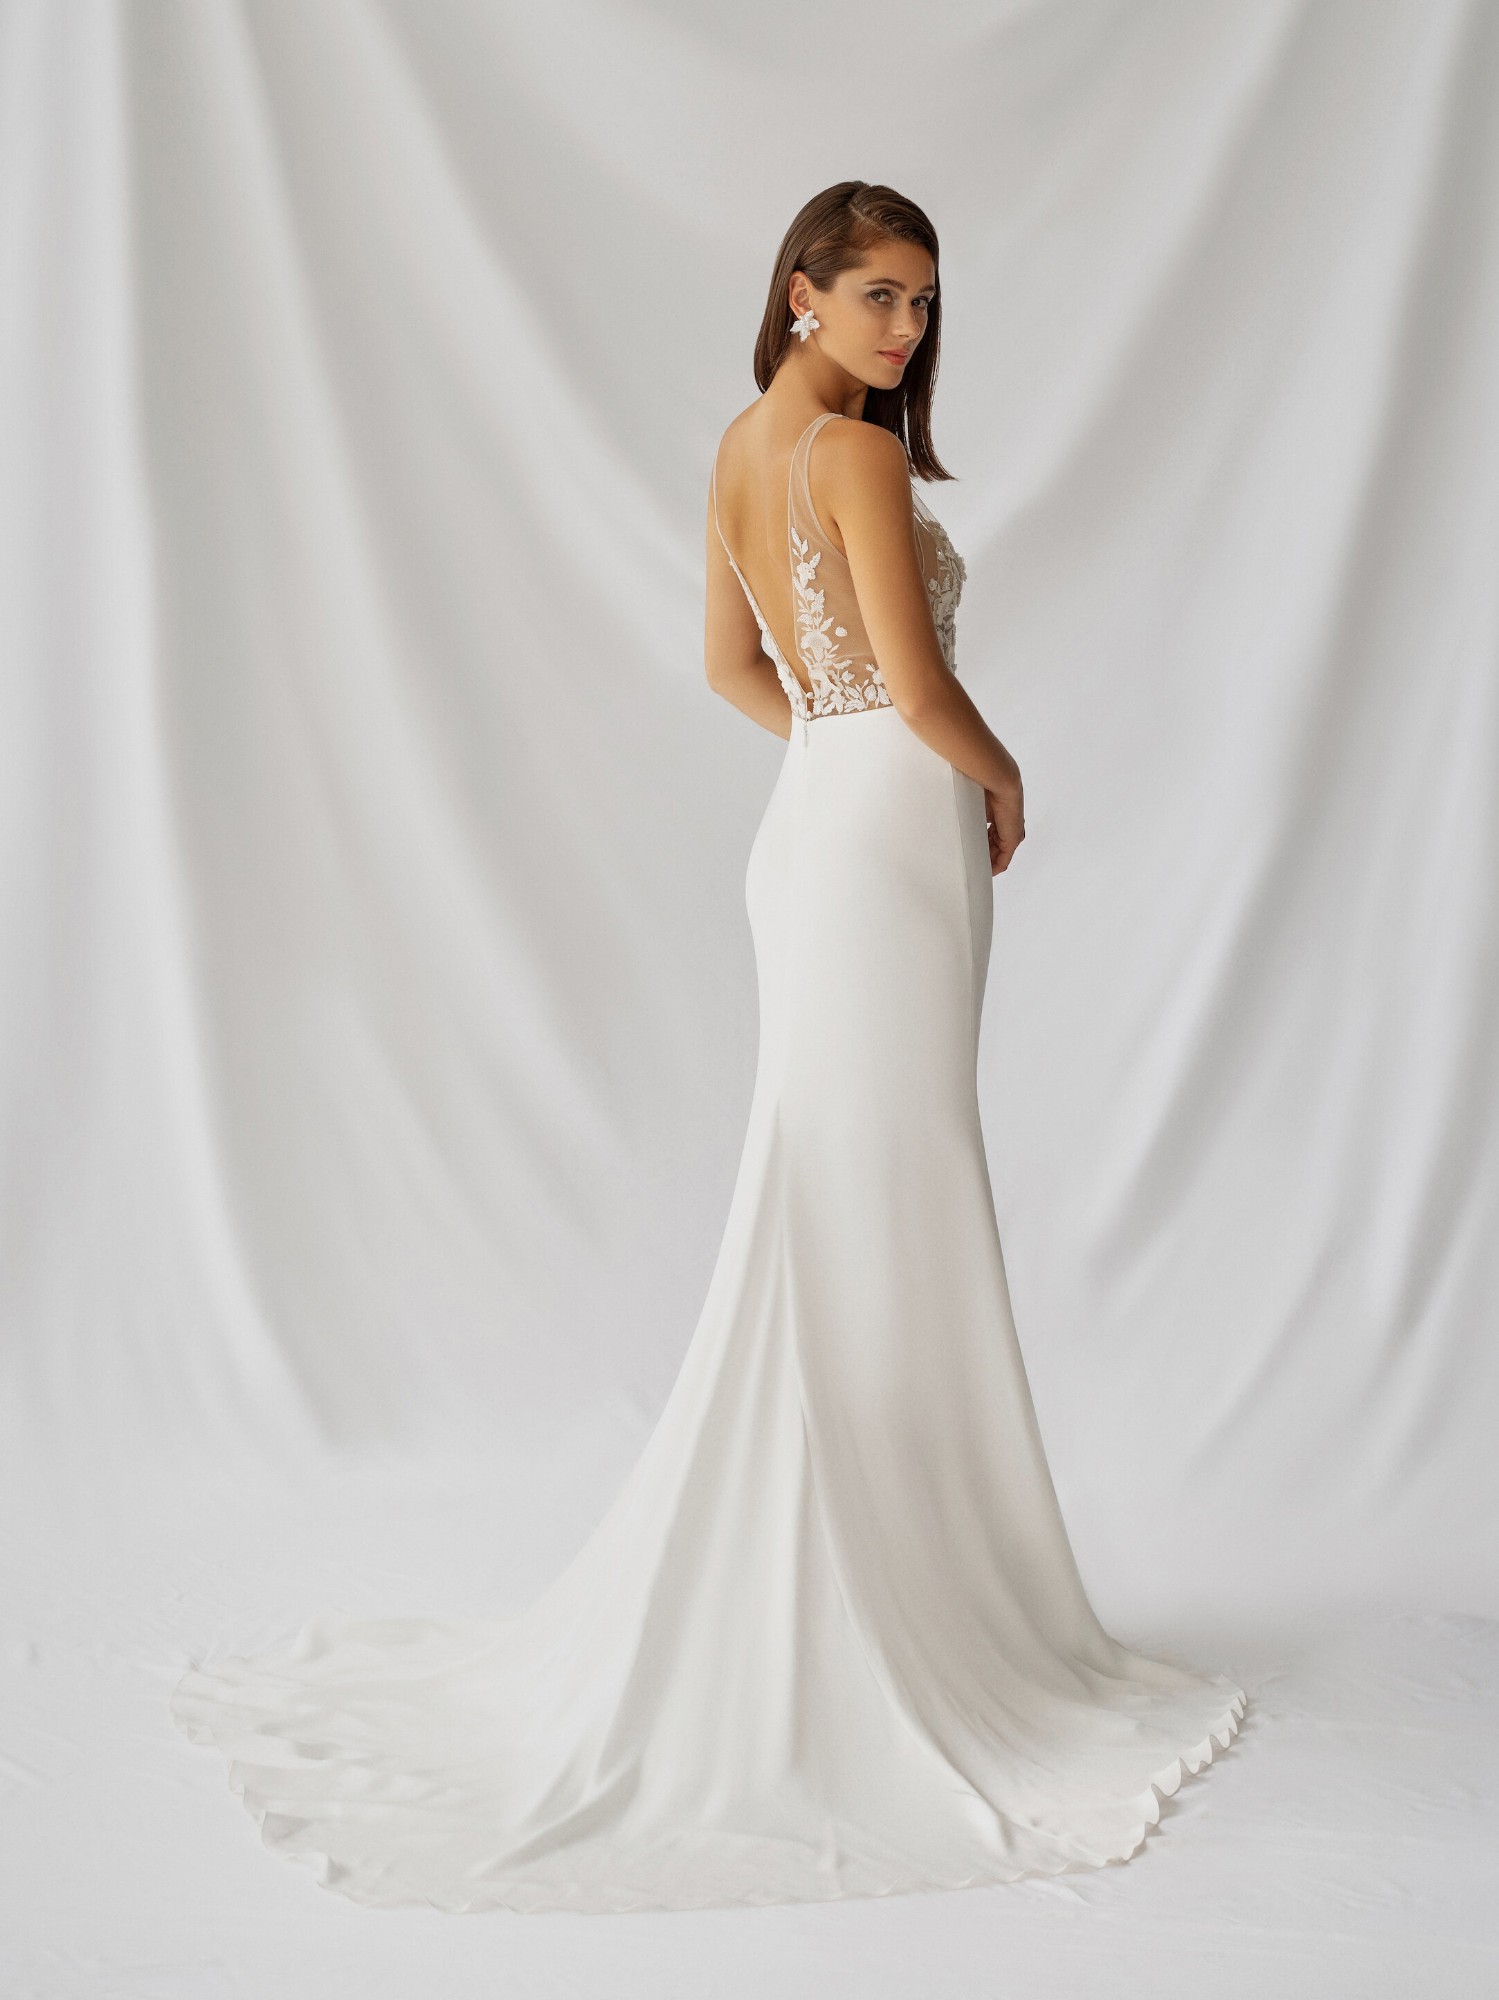 Lilium Gown Inspirated By Botanica of Alexandra Grecco 2021 Bridal Collection